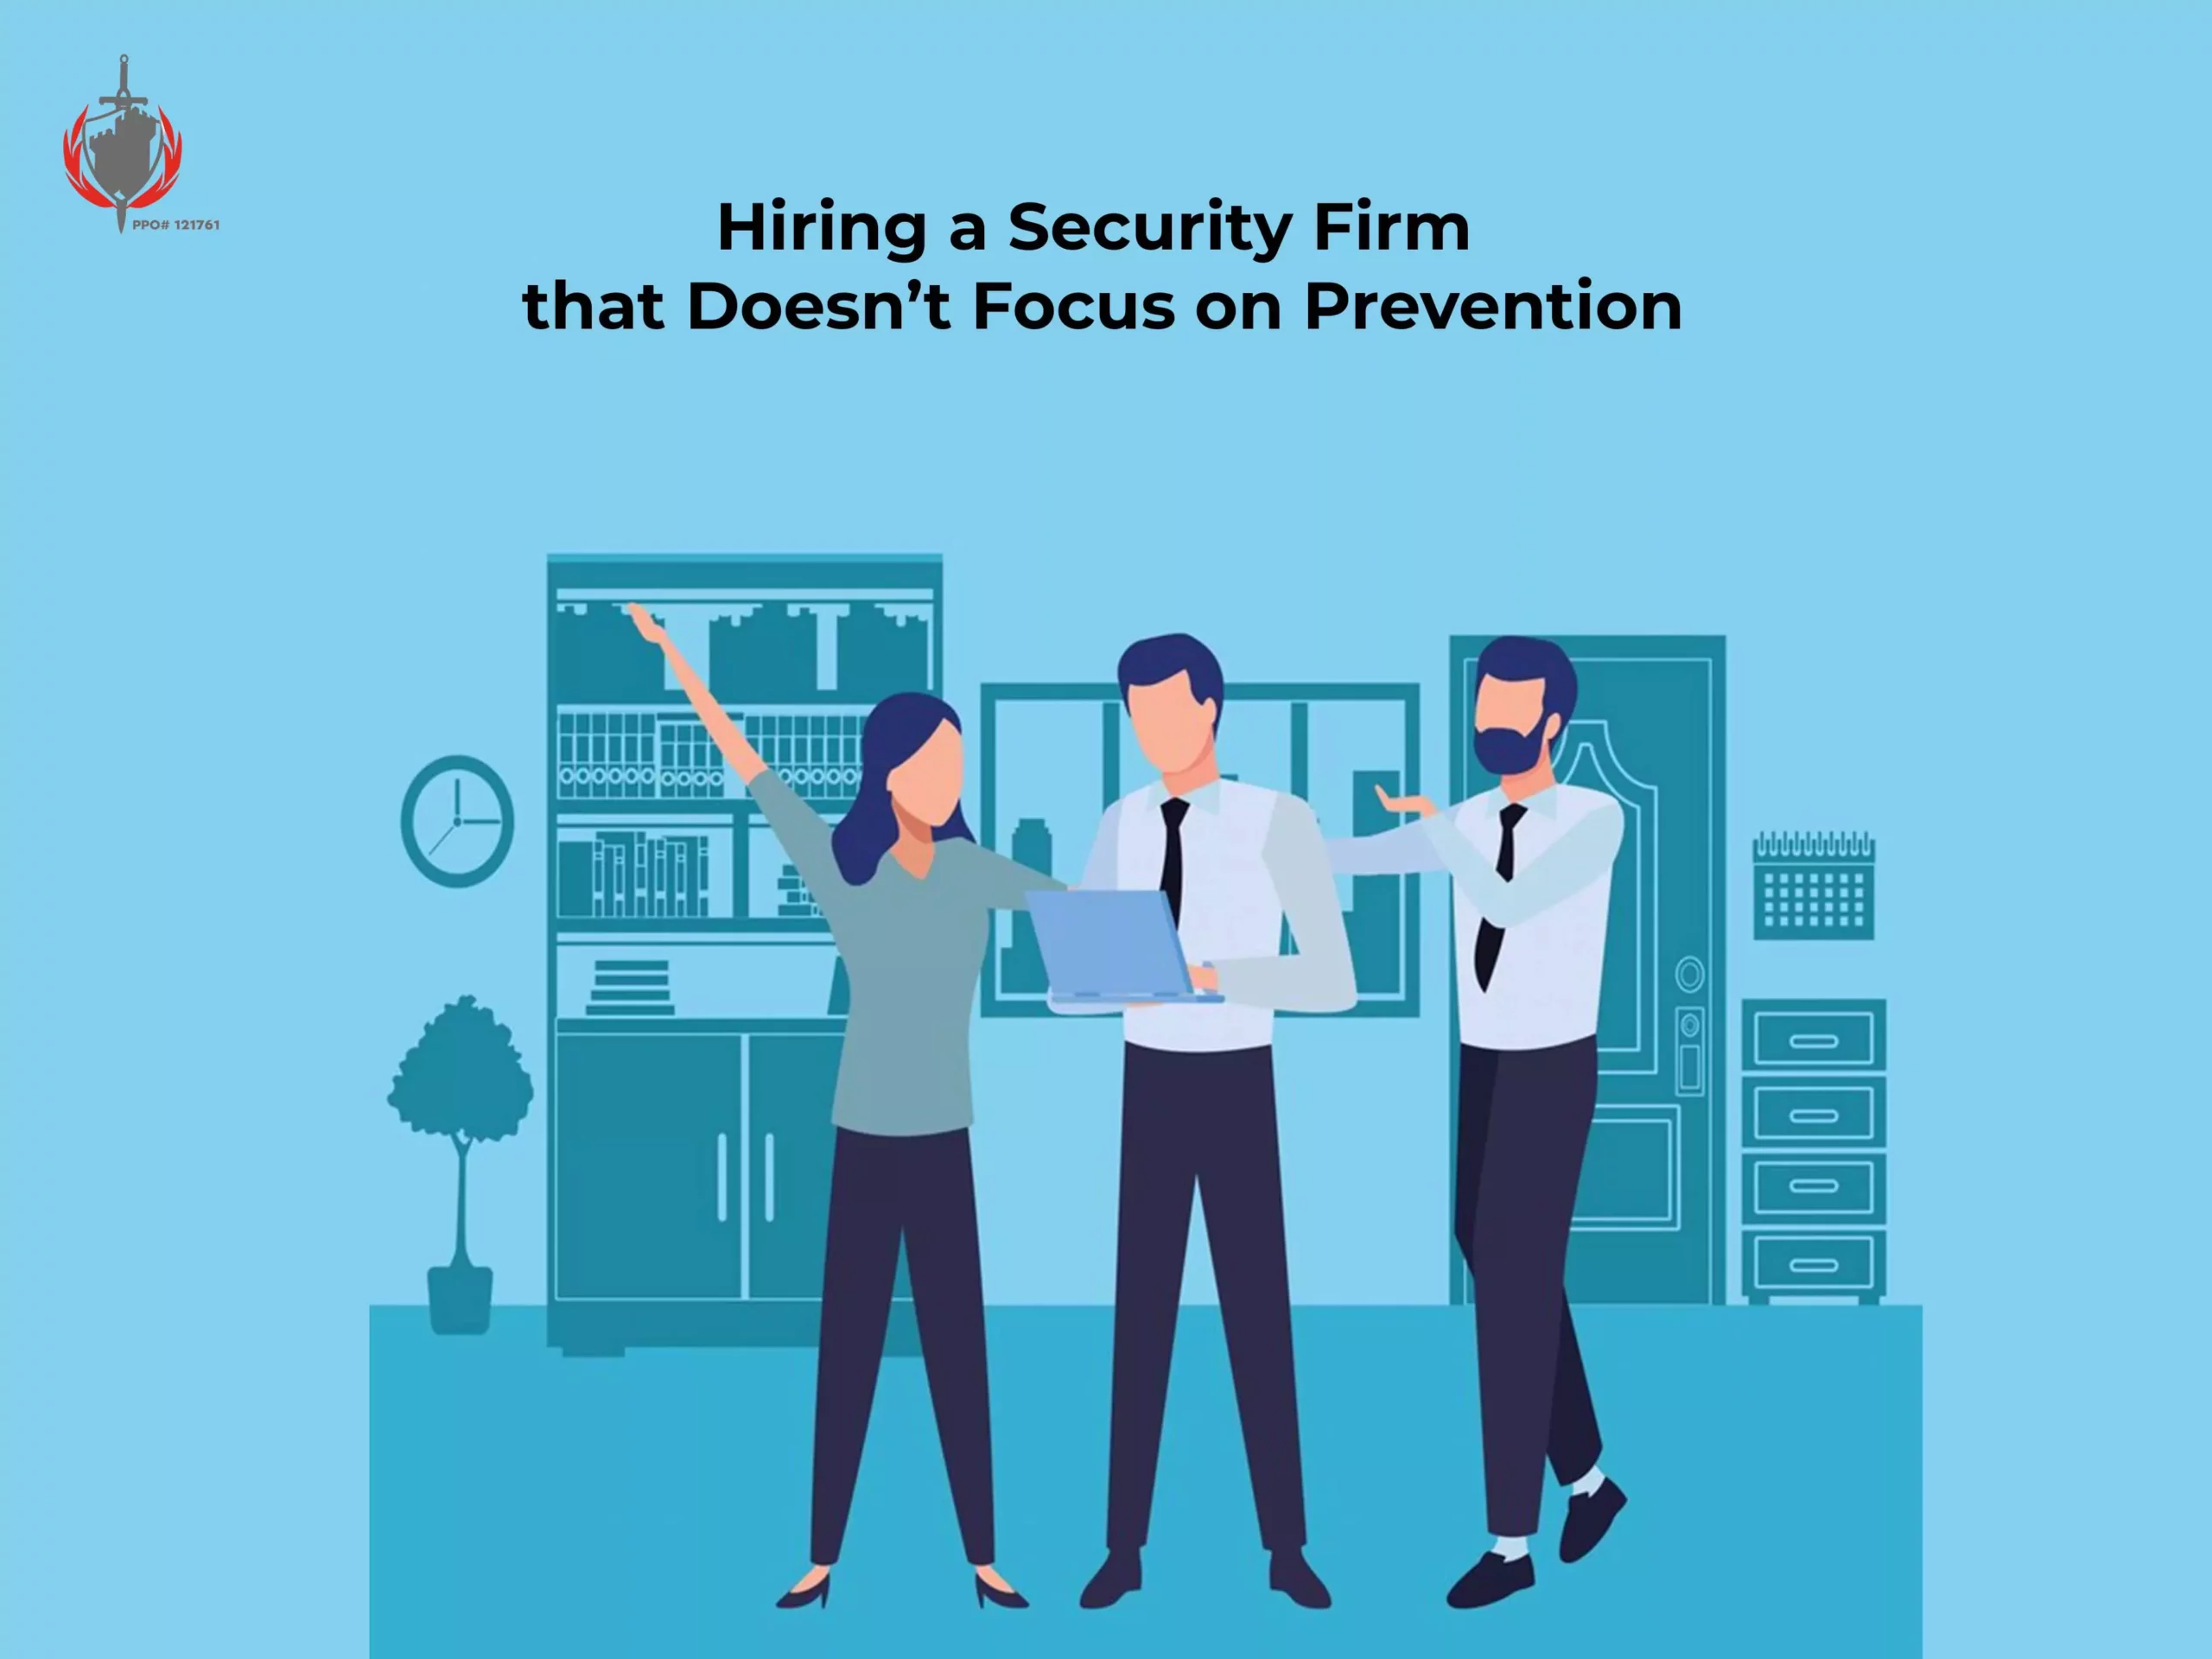 Hiring a Security Firm that Doesn’t Focus on Prevention